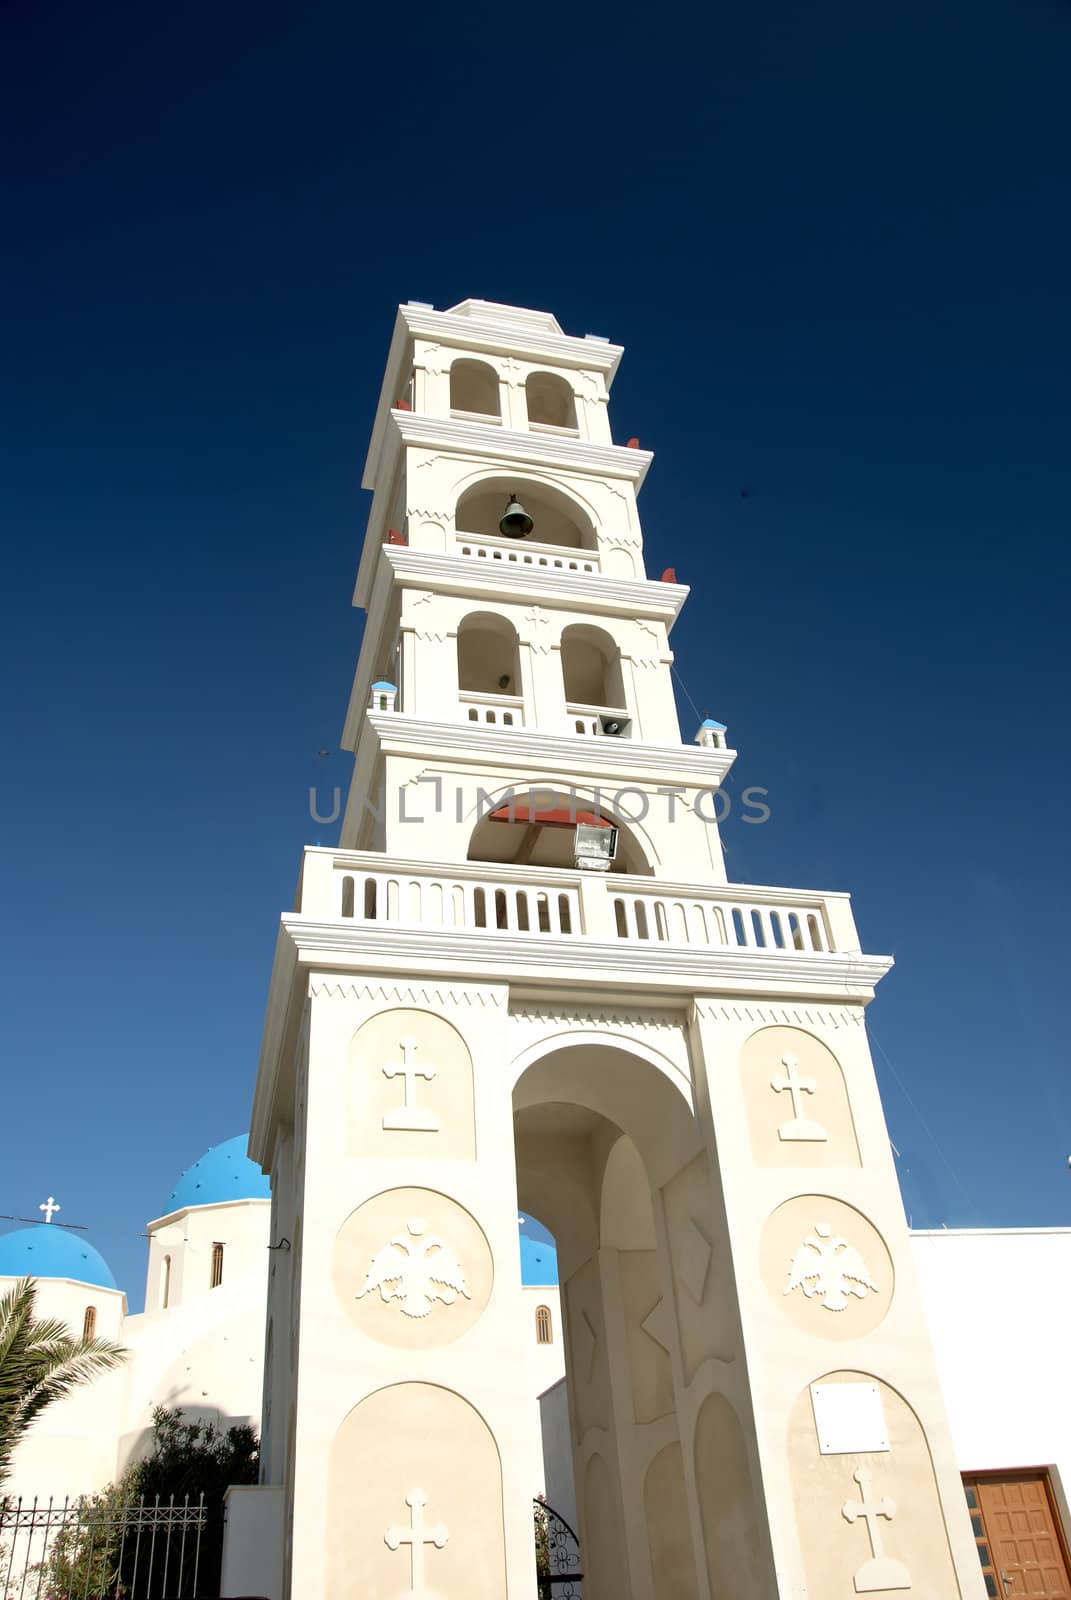 The Bell Tower of the Church in Perissa Santorini